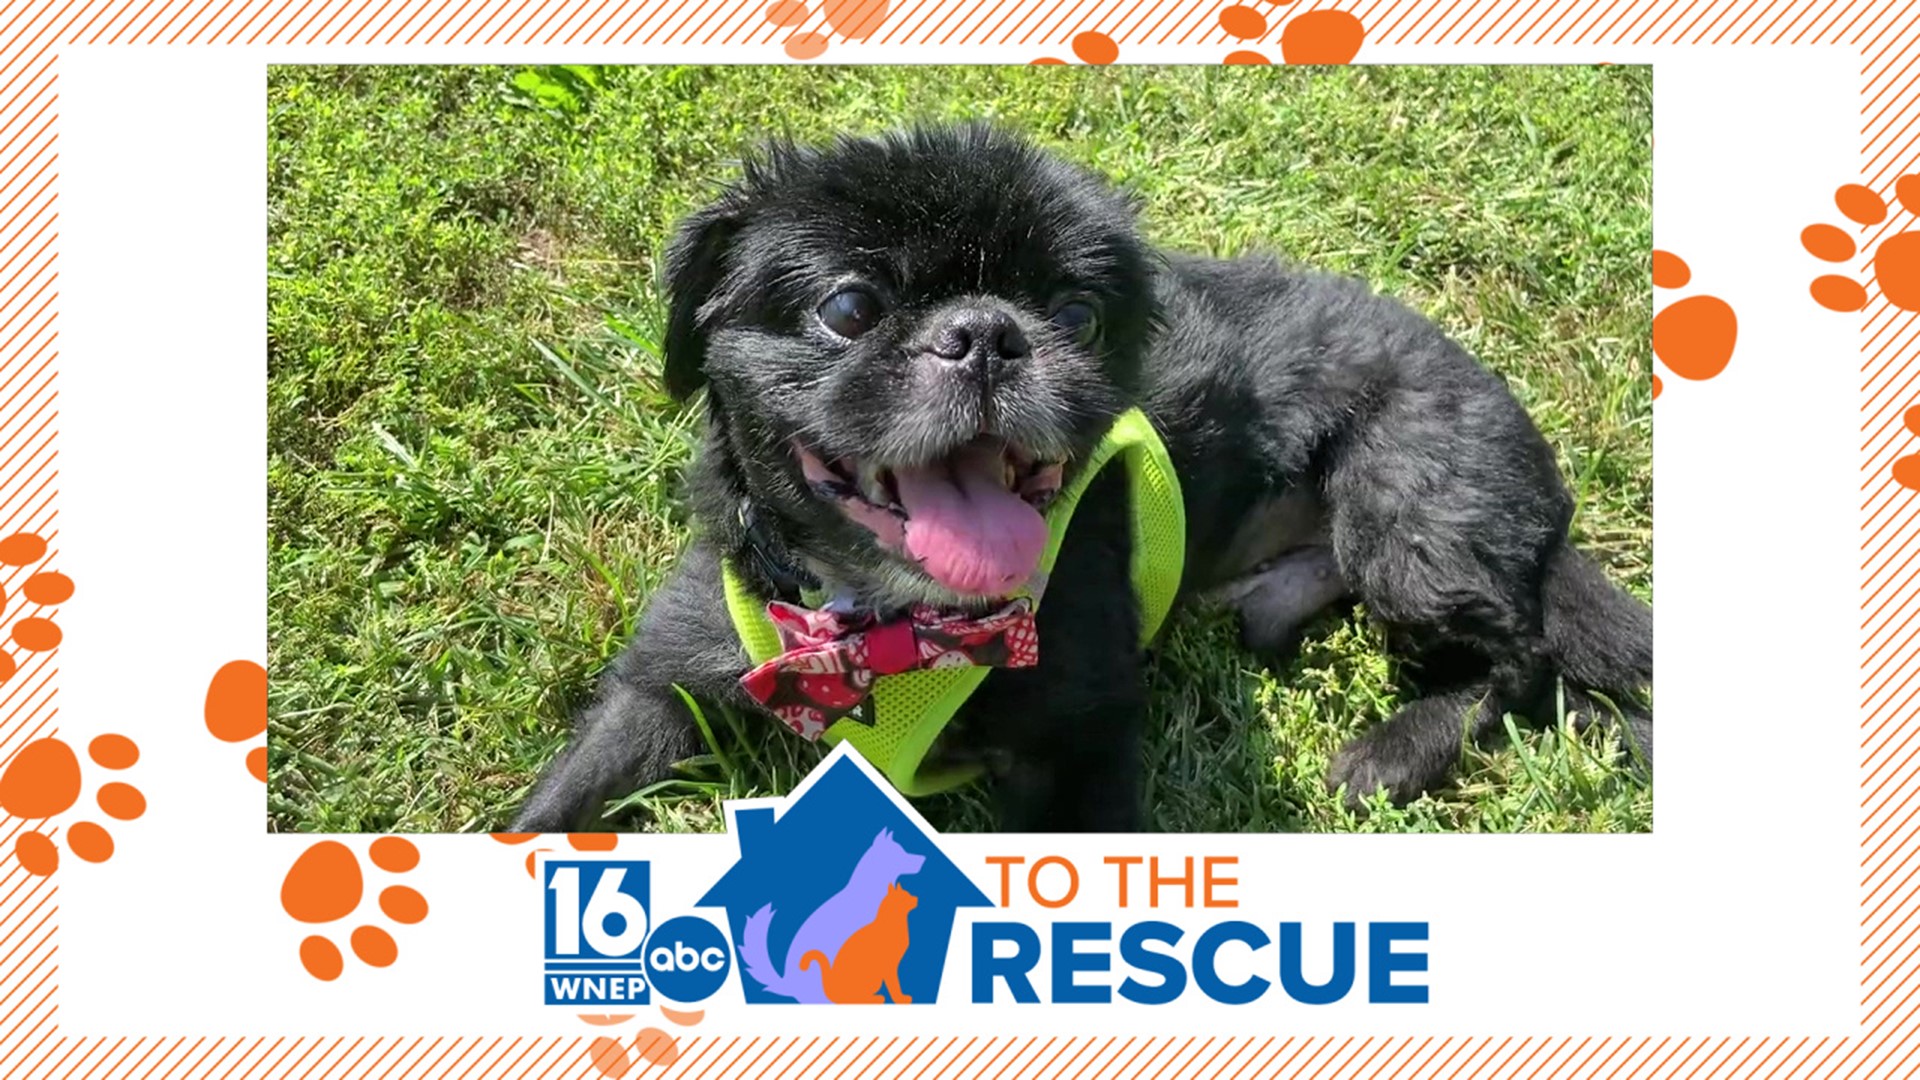 In this week's 16 To The Rescue, we meet a 5-year-old dog who was neglected most of his life, and was finally surrendered about a month ago, now ready to be adopted.